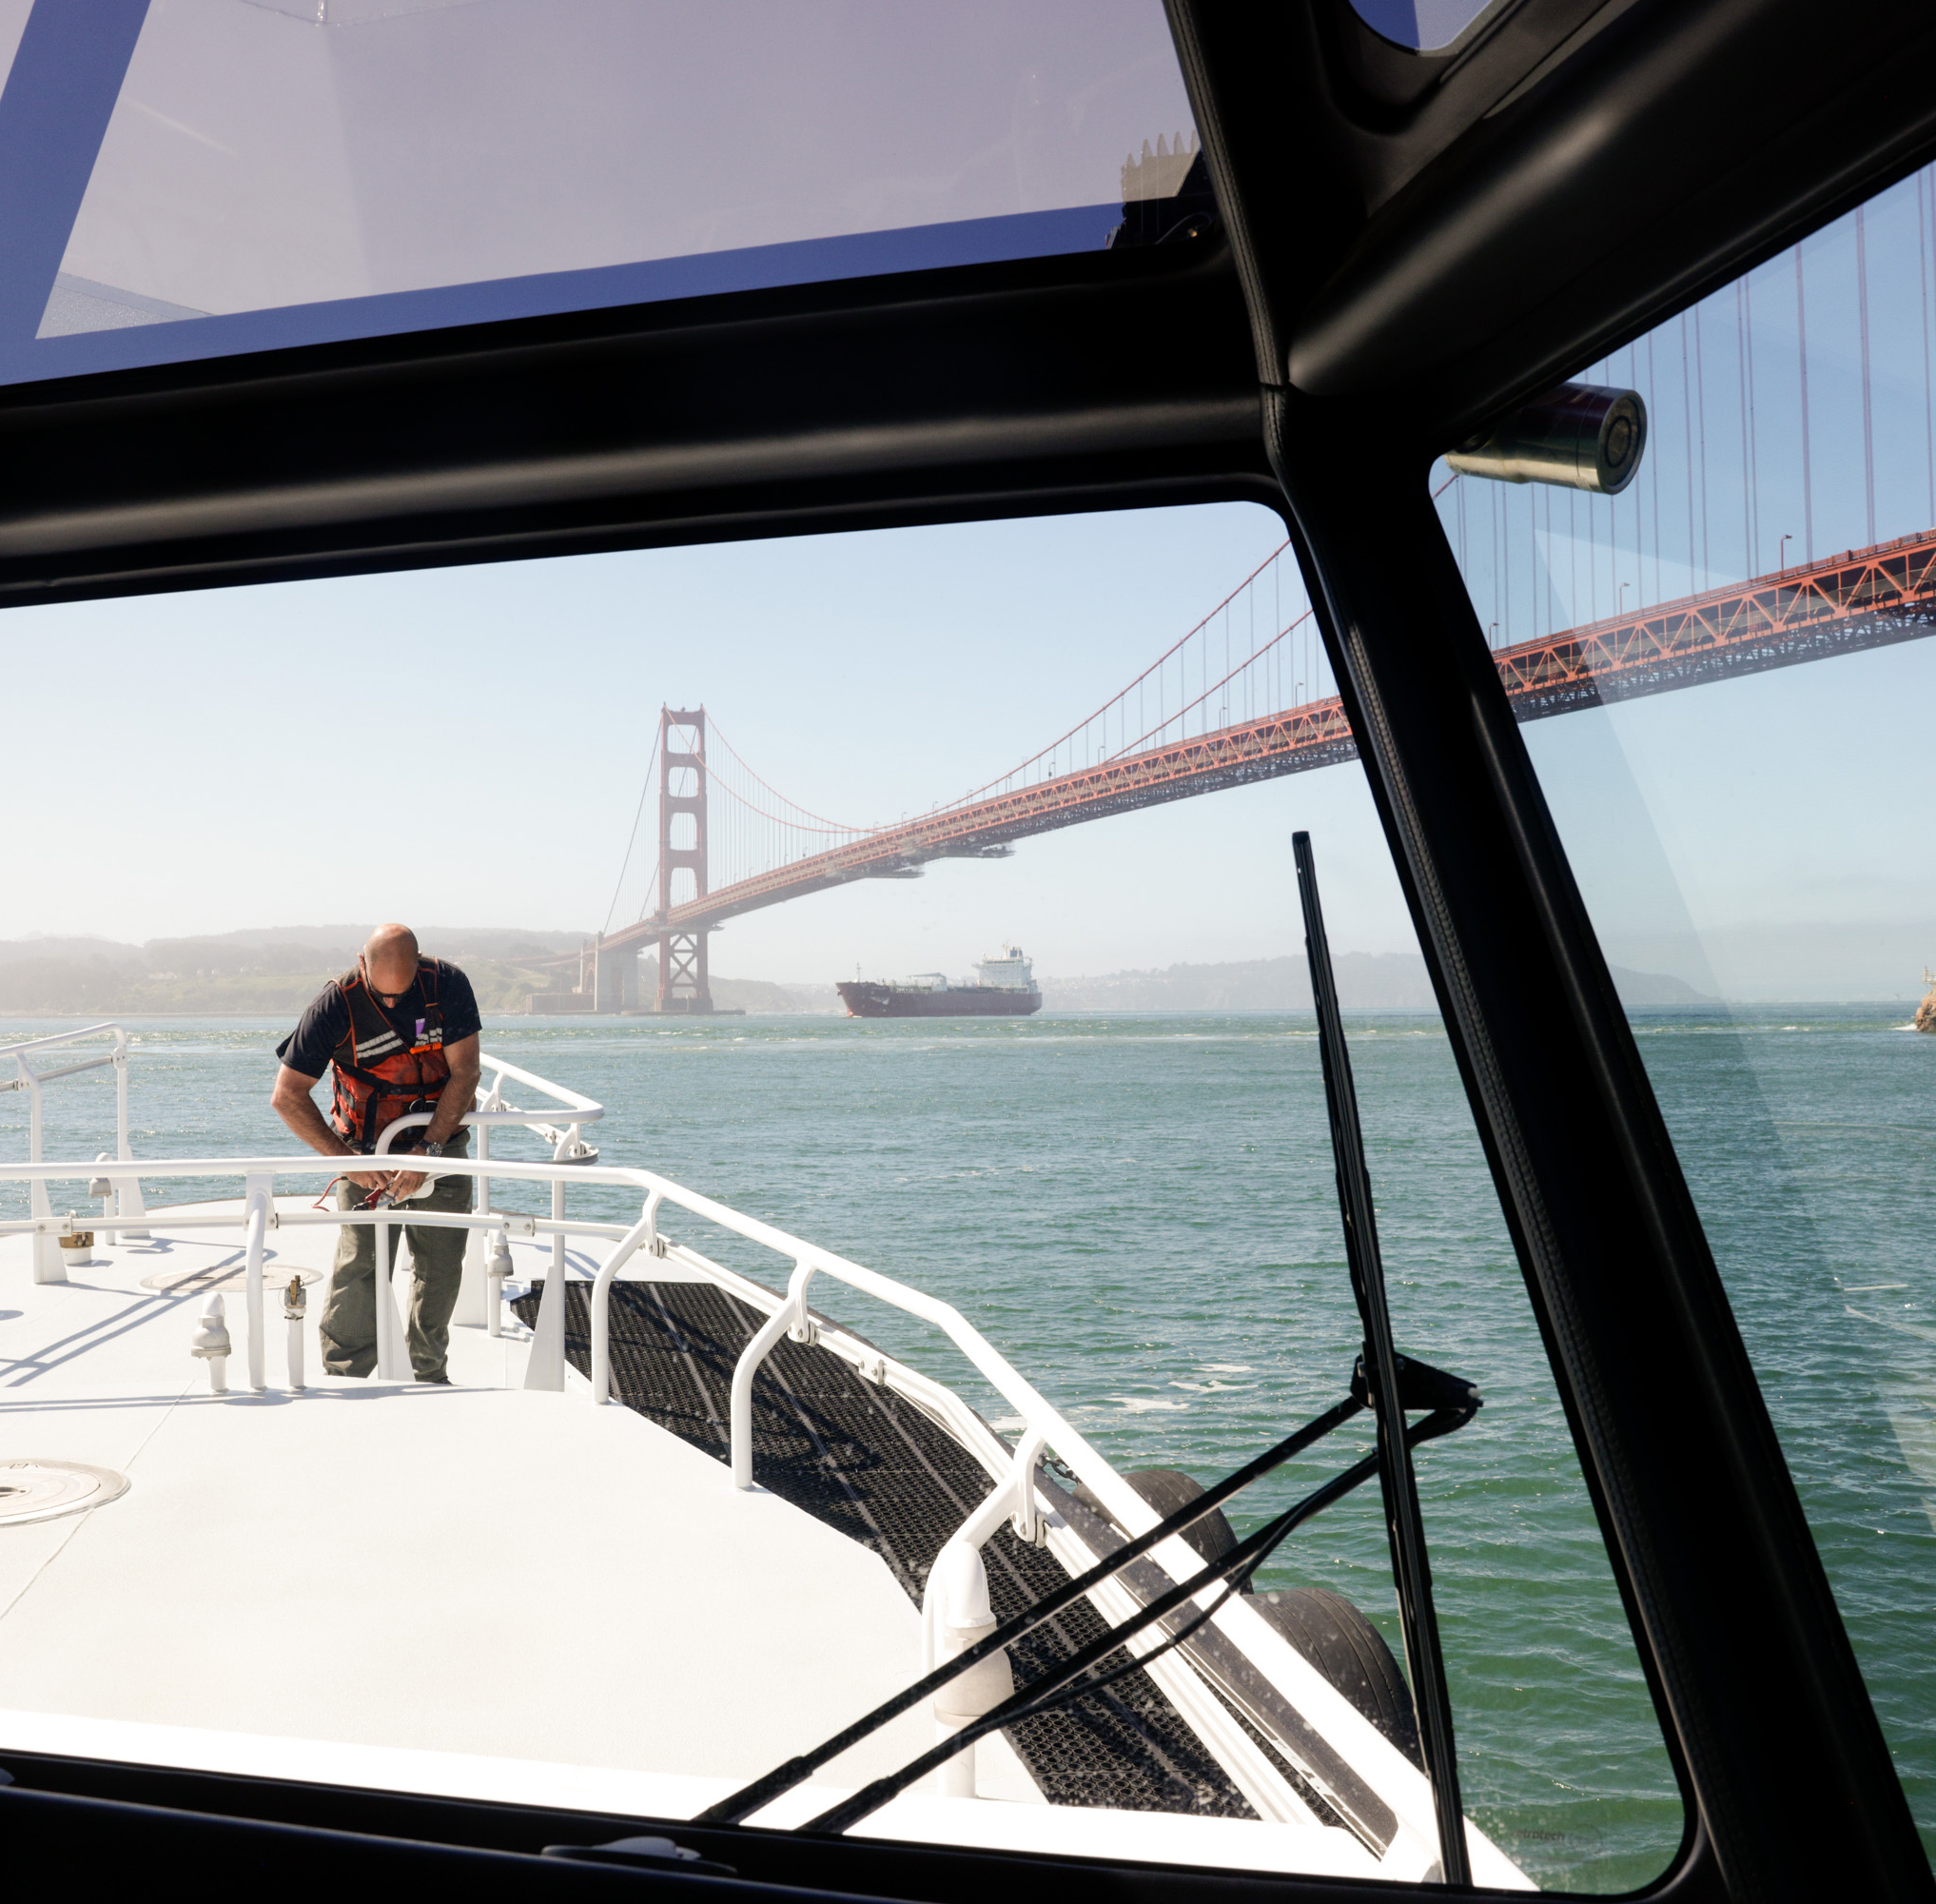 A man on a boat's bow with the Golden Gate Bridge and a ship in the background.